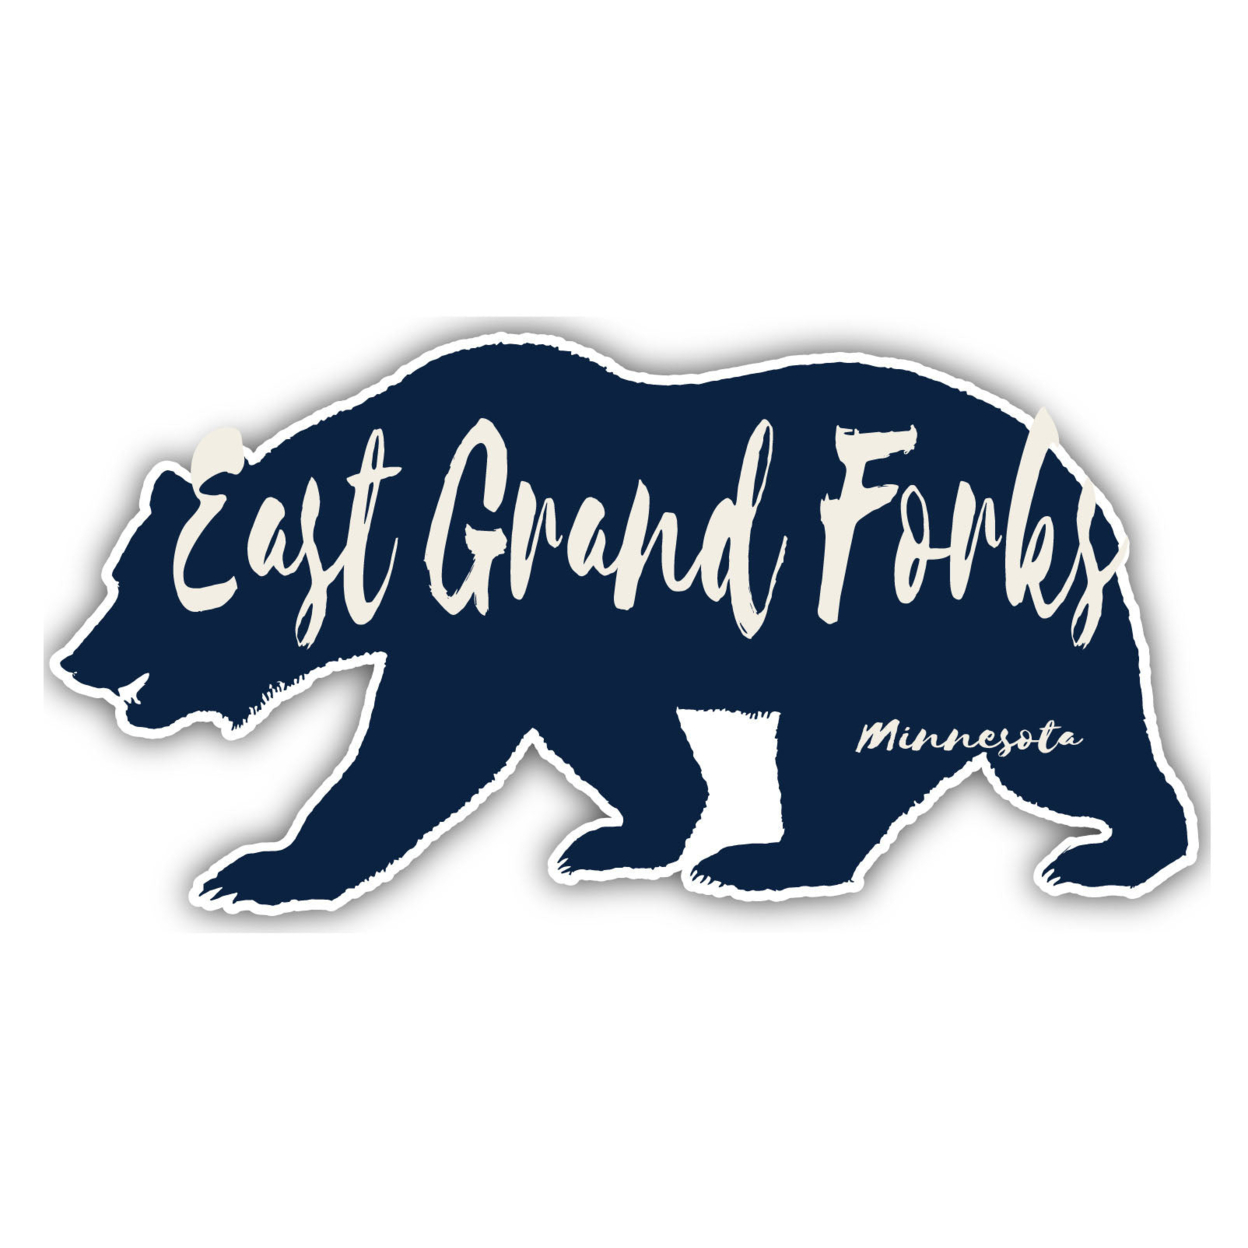 East Grand Forks Minnesota Souvenir Decorative Stickers (Choose Theme And Size) - Single Unit, 10-Inch, Tent